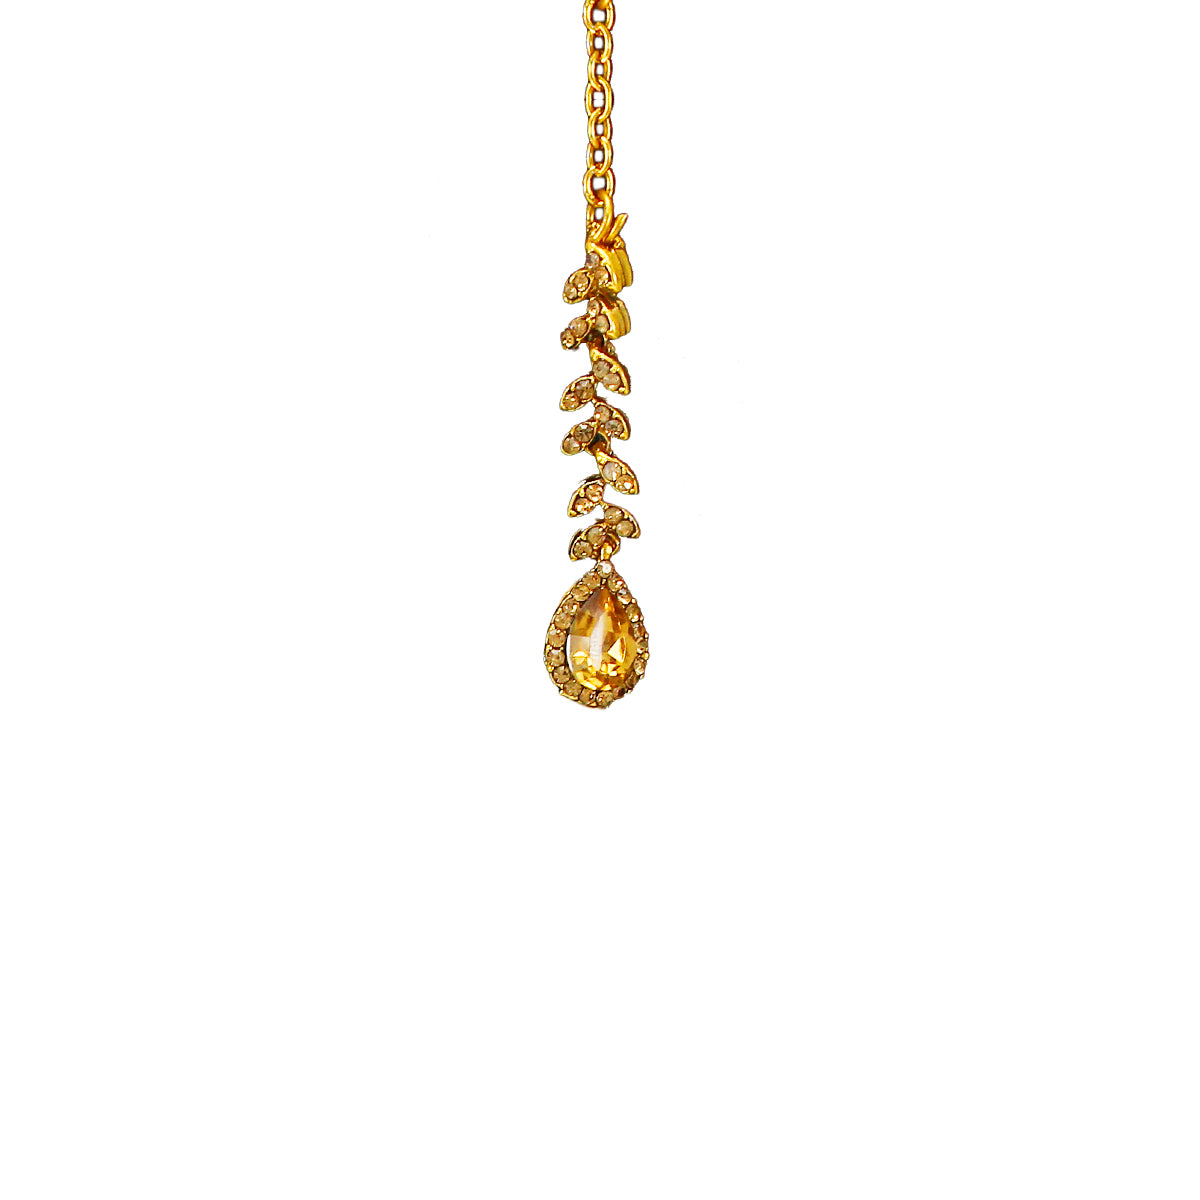 Latest Royal Leaf Design Necklace and Dangler Earrings with White Yellow Stones